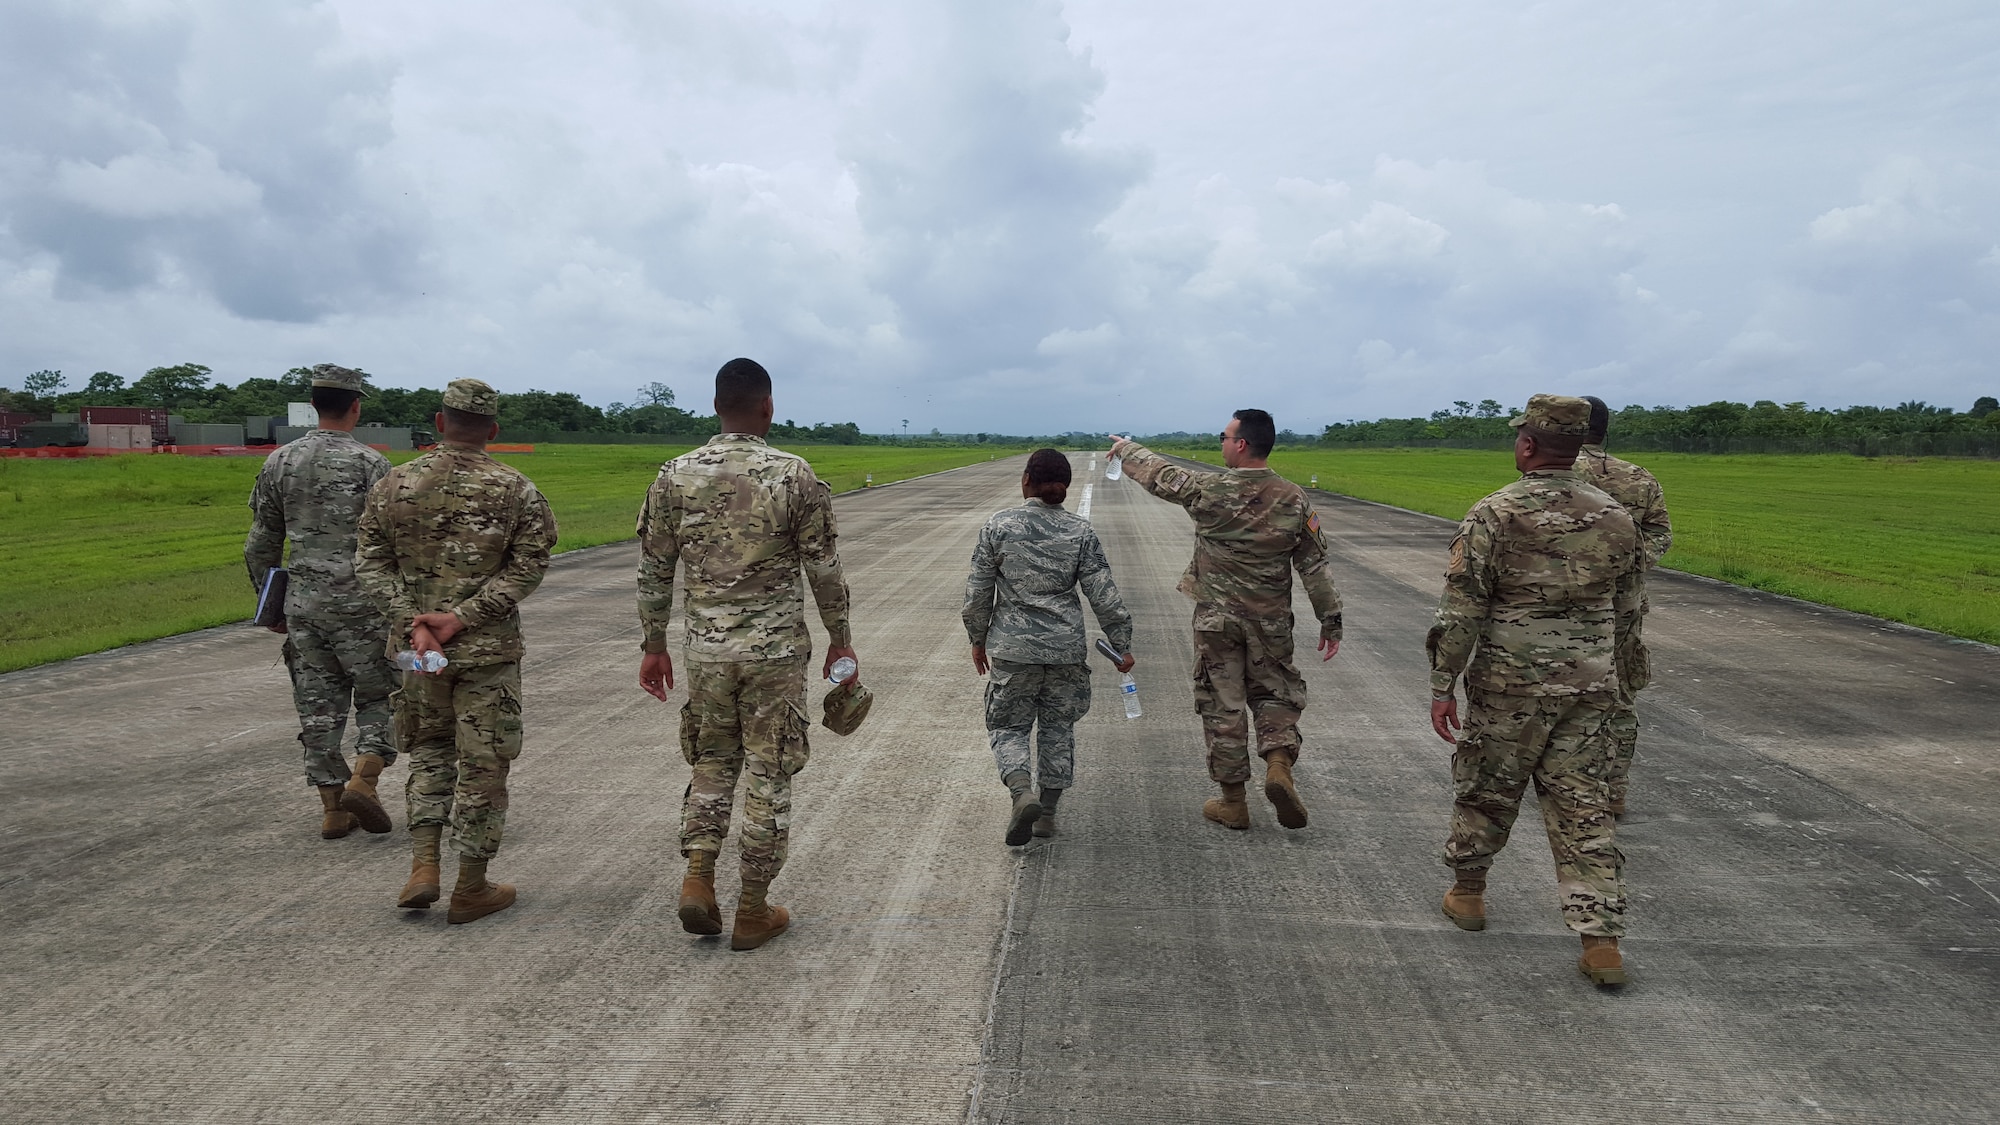 Air Advisors assigned to the 571st Mobility Support Advisory Squadron and students from the National Air and Naval Service of Panama, also known as SENAN, conduct a runway assessment at the forward operation location of Nicanor Air Base in Panama. Approximately 235 hours of assessments, seminars, and hands-on practicum took place at five bases within the Panama City location, graduating 63 SENAN personnel from multiple duty specialties. (U.S. Air Force Photo by Lt. Col. Christopher Shea)